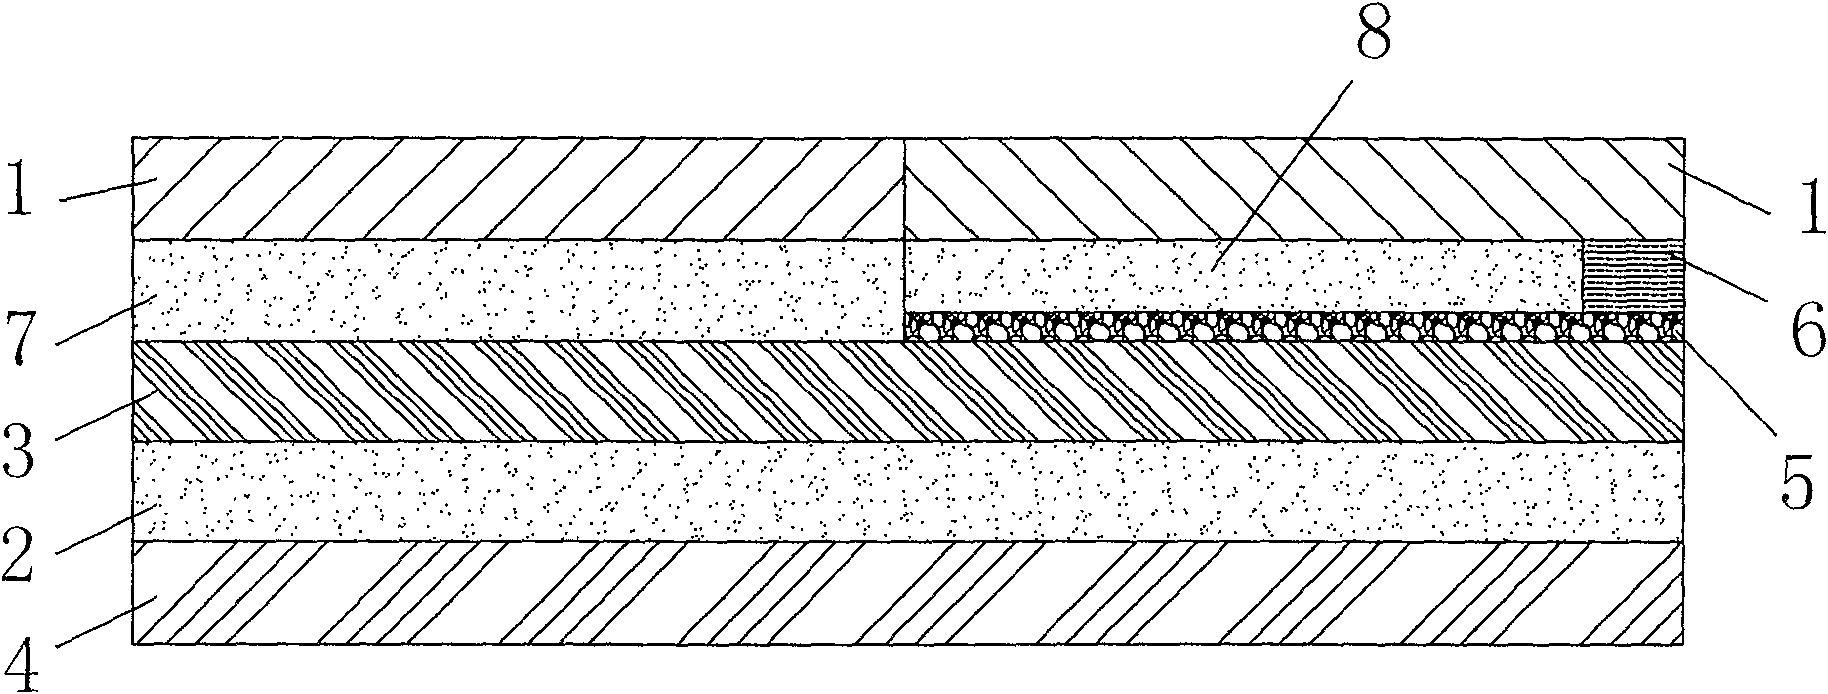 Dyeing silicon oil label, dyeing silicon oil and preparation method thereof